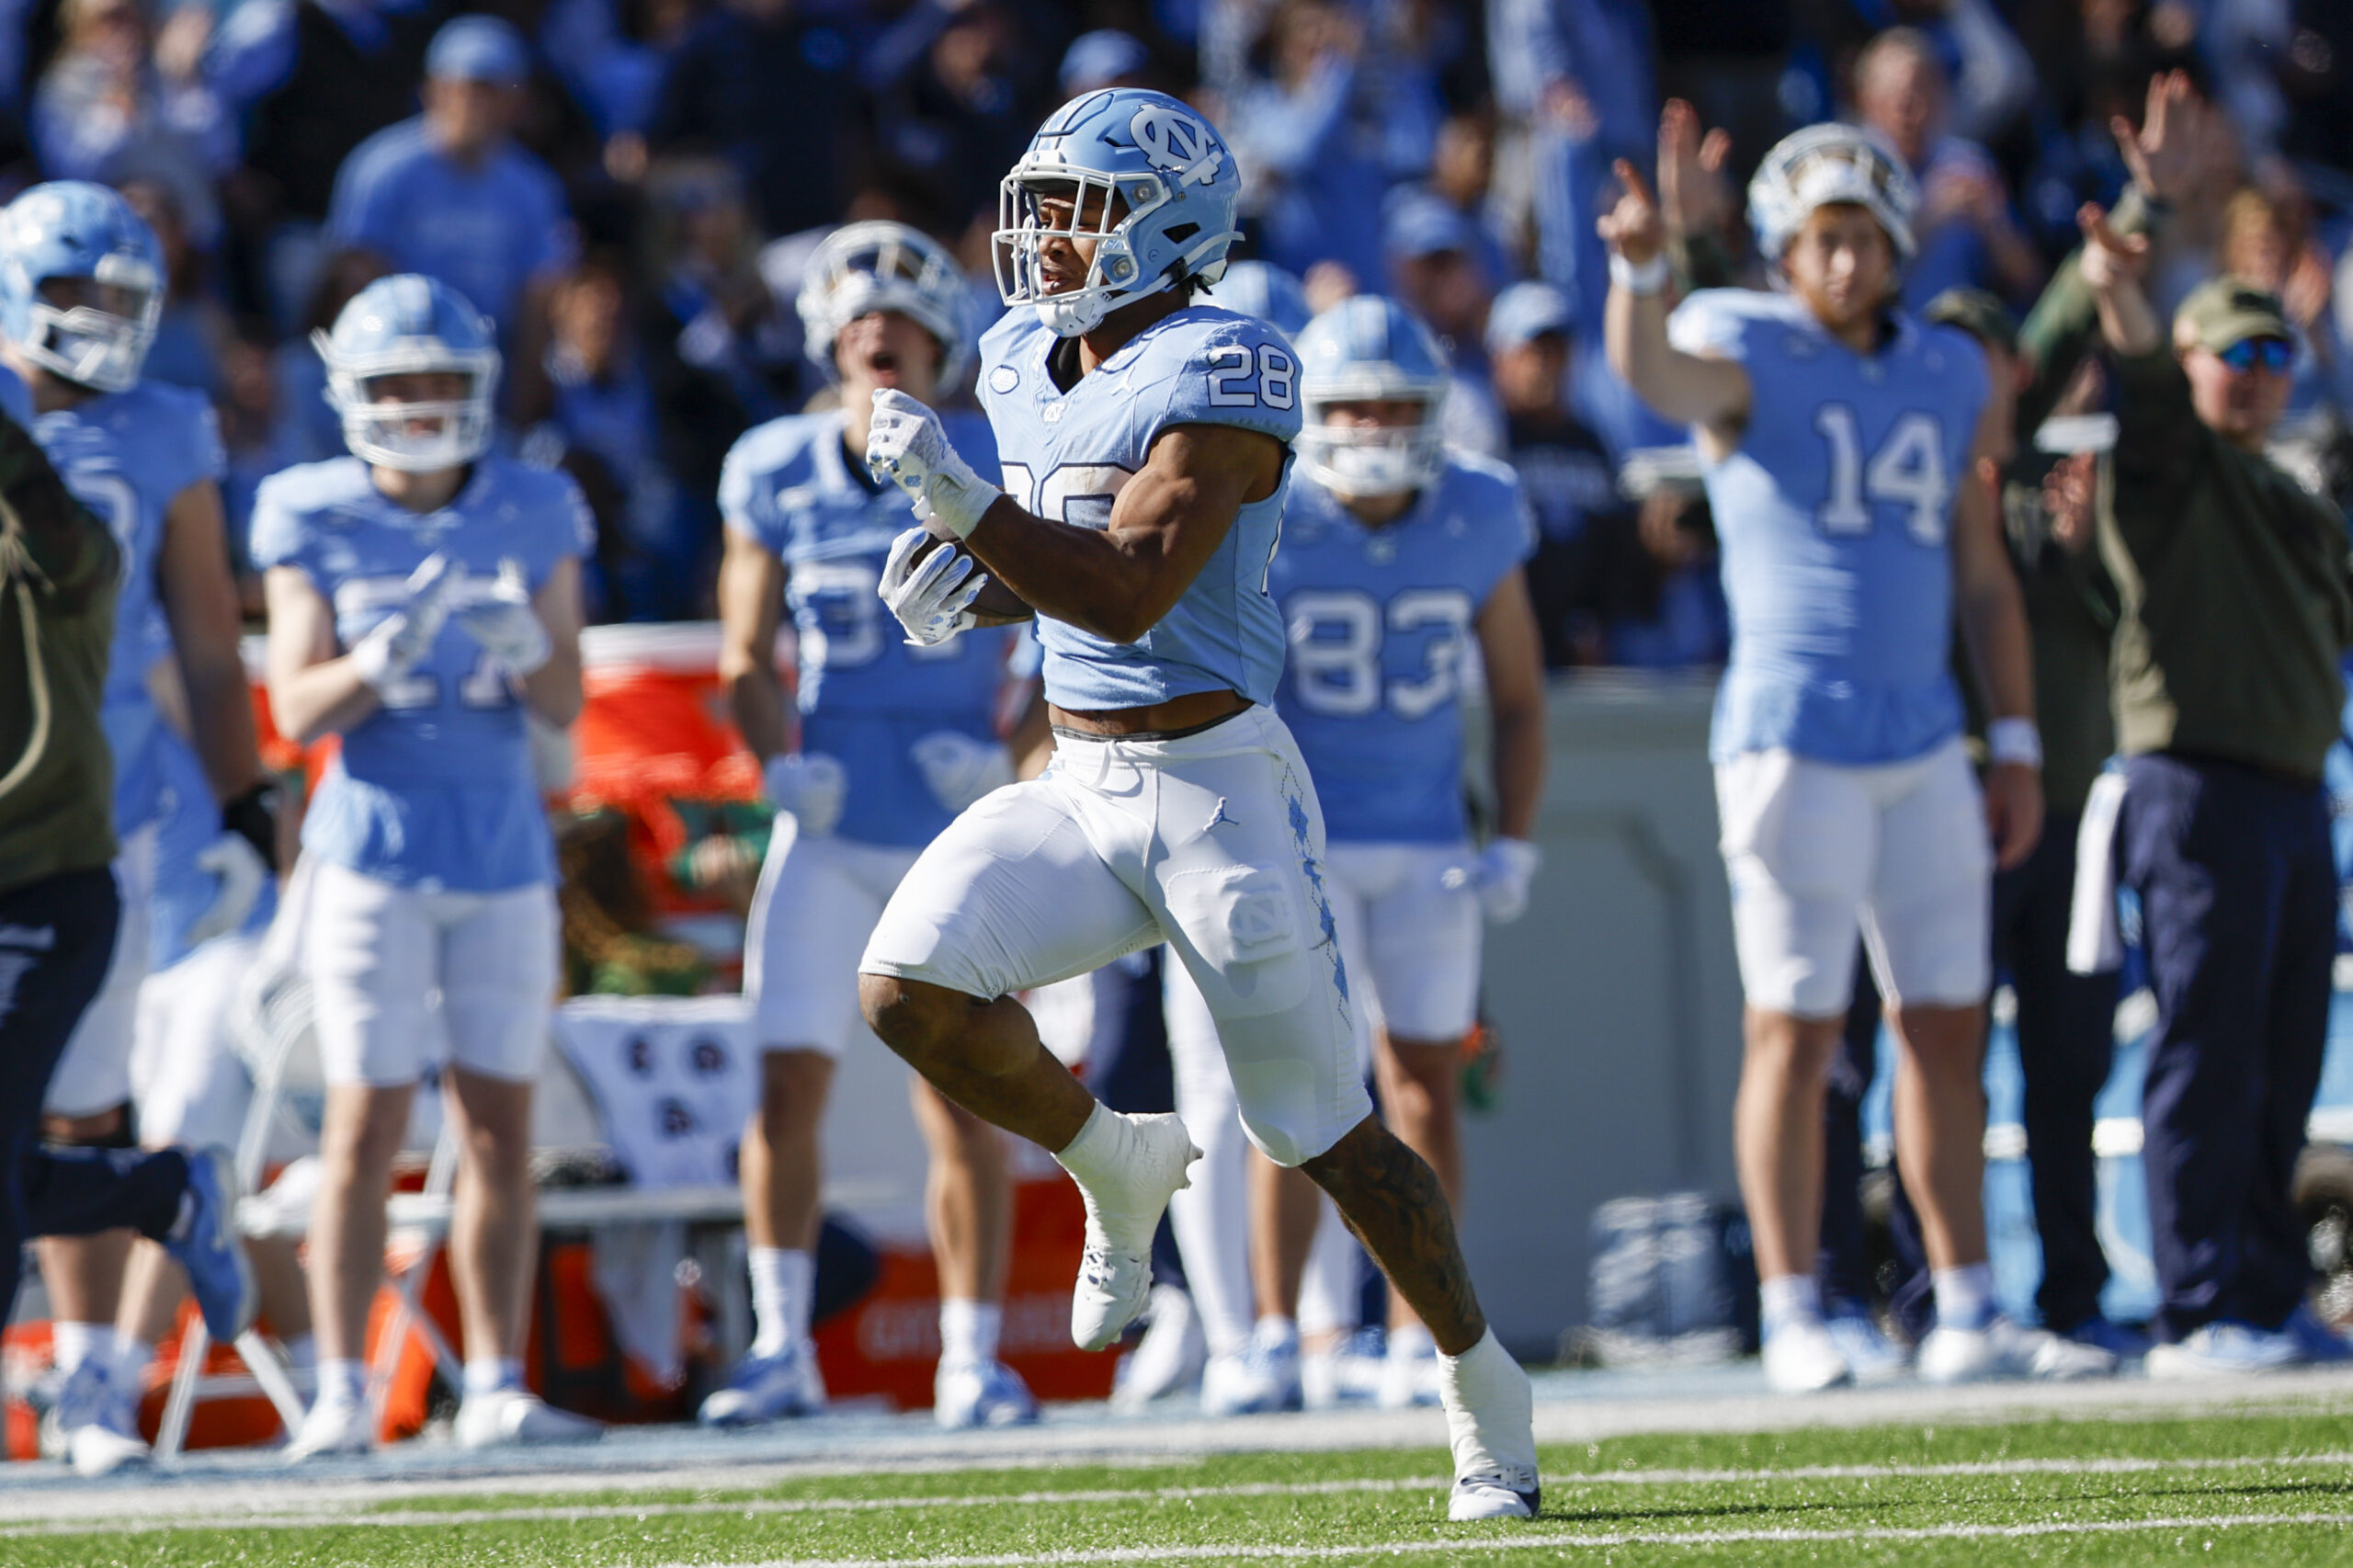 UNC Football vs. Duke: How to Watch, Streaming Options, Kickoff Time